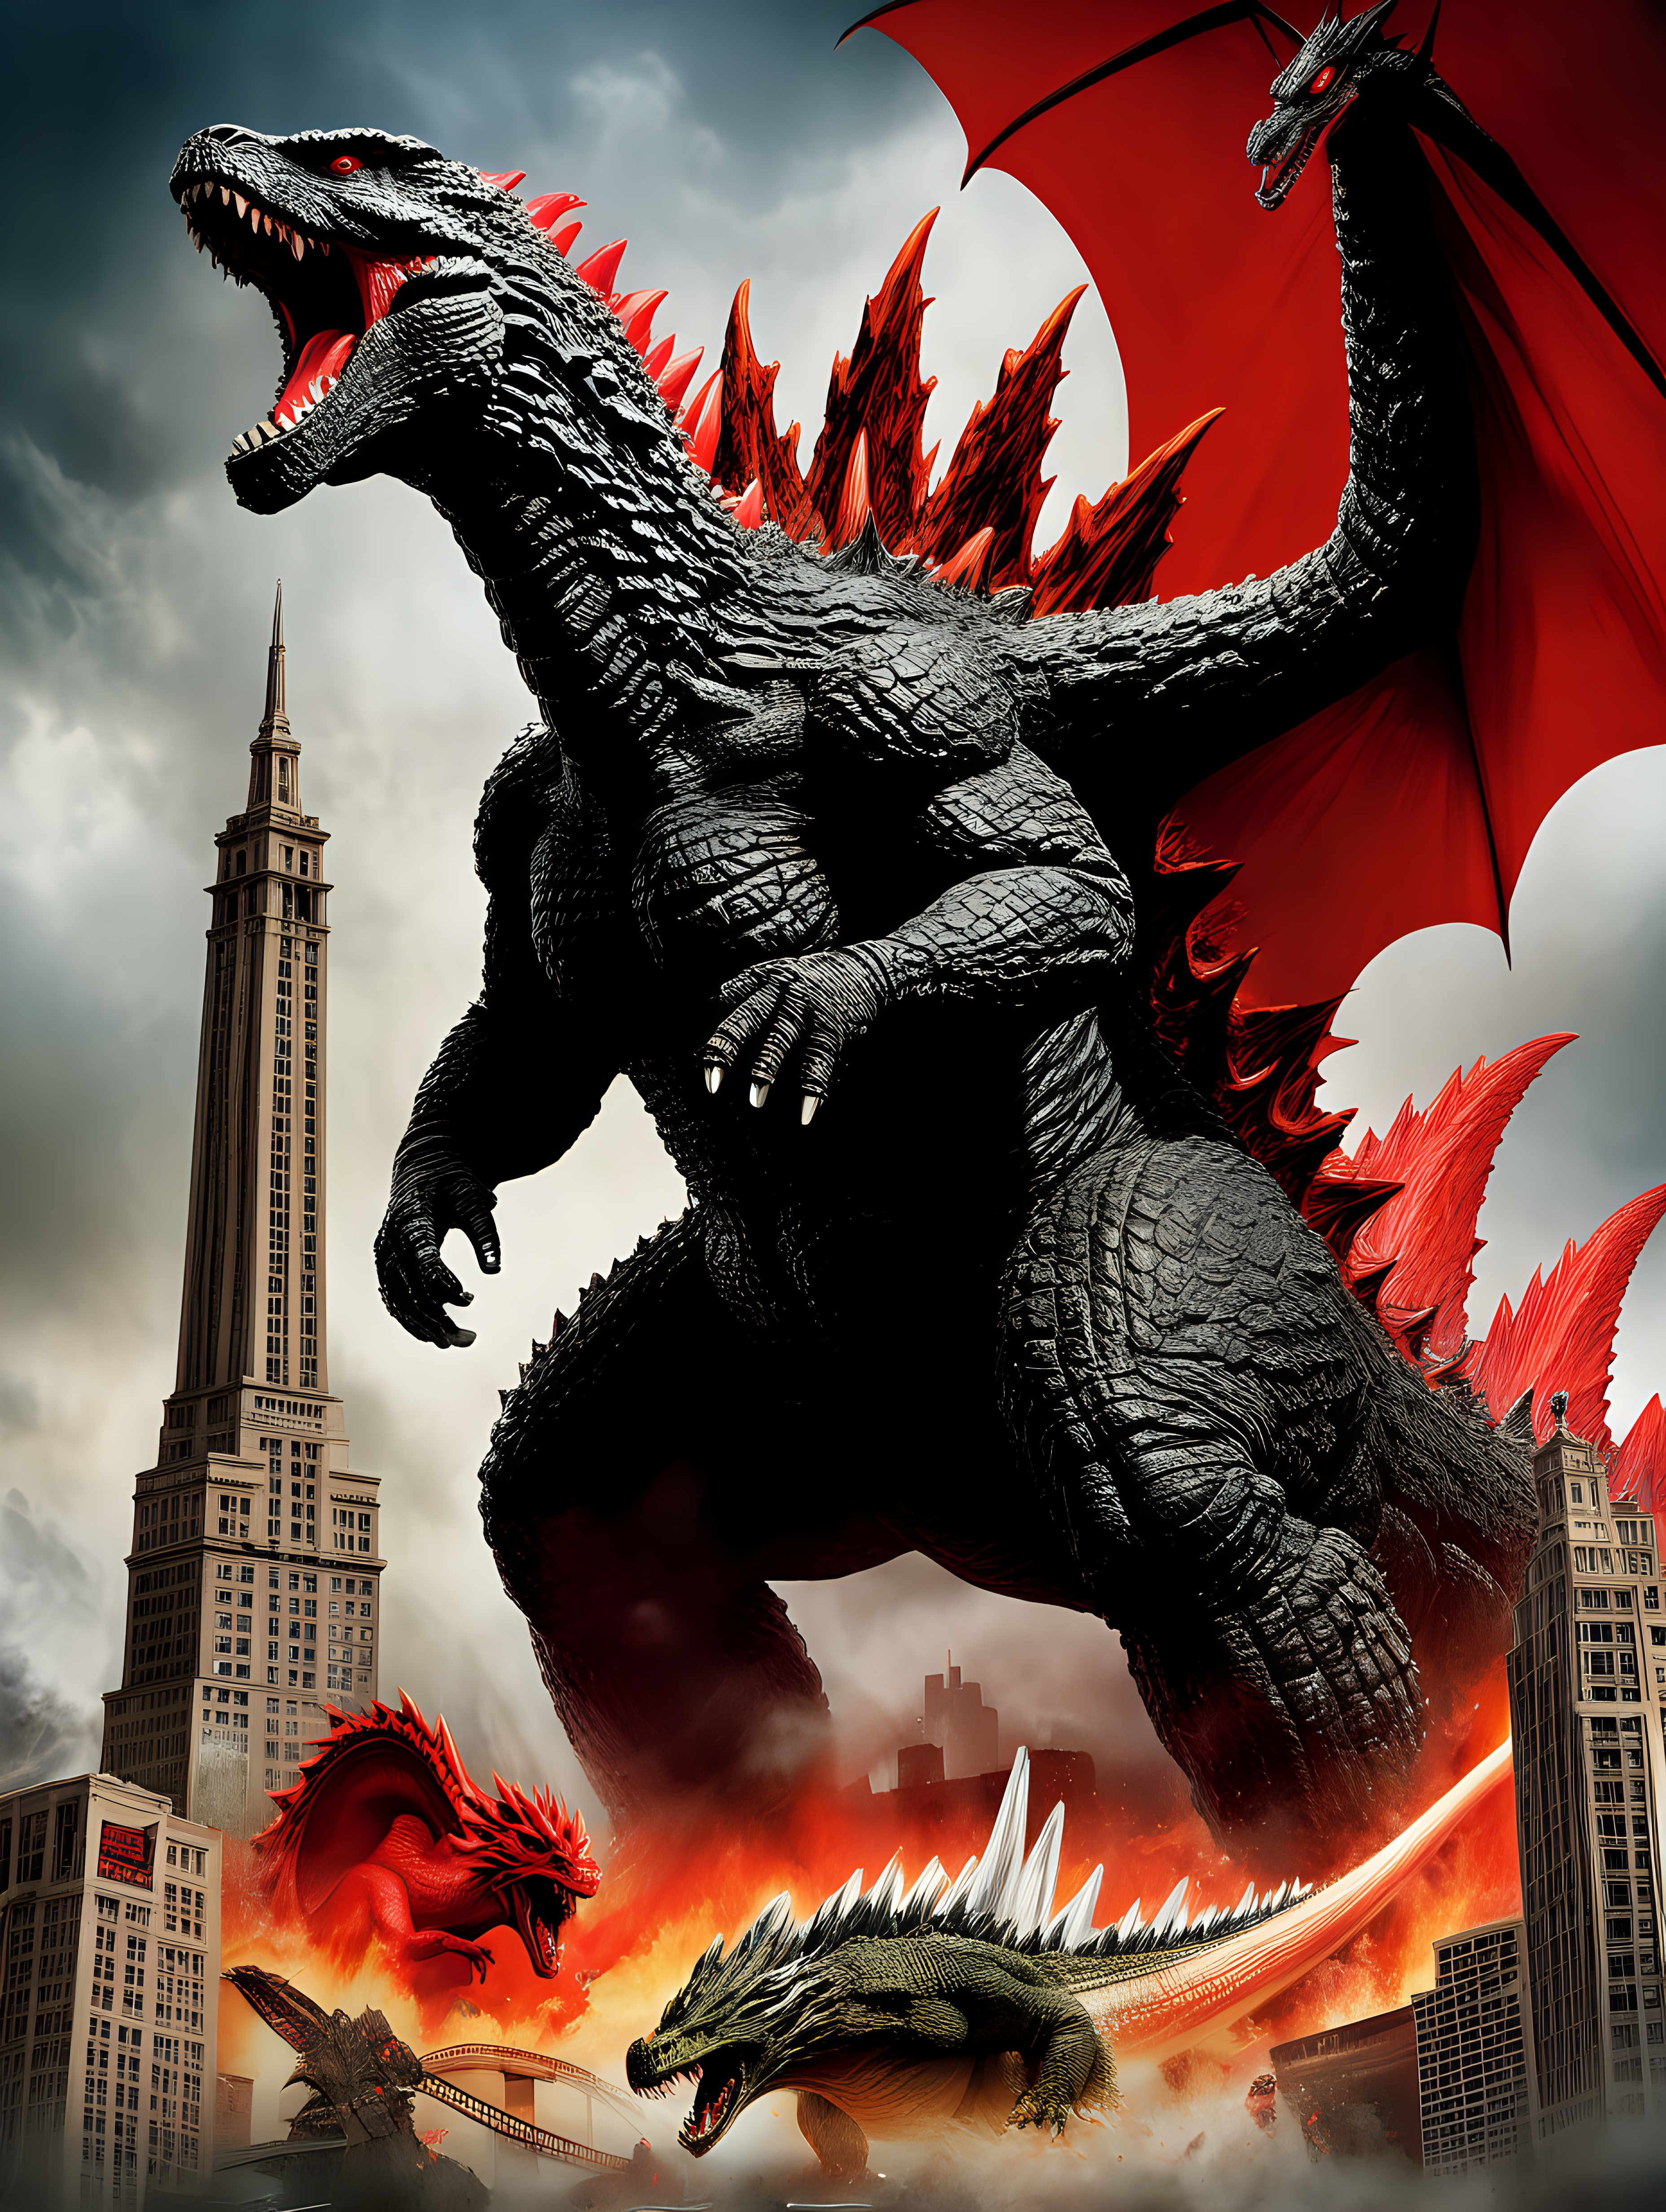 Movie poster of Godzilla a red dragon destroying